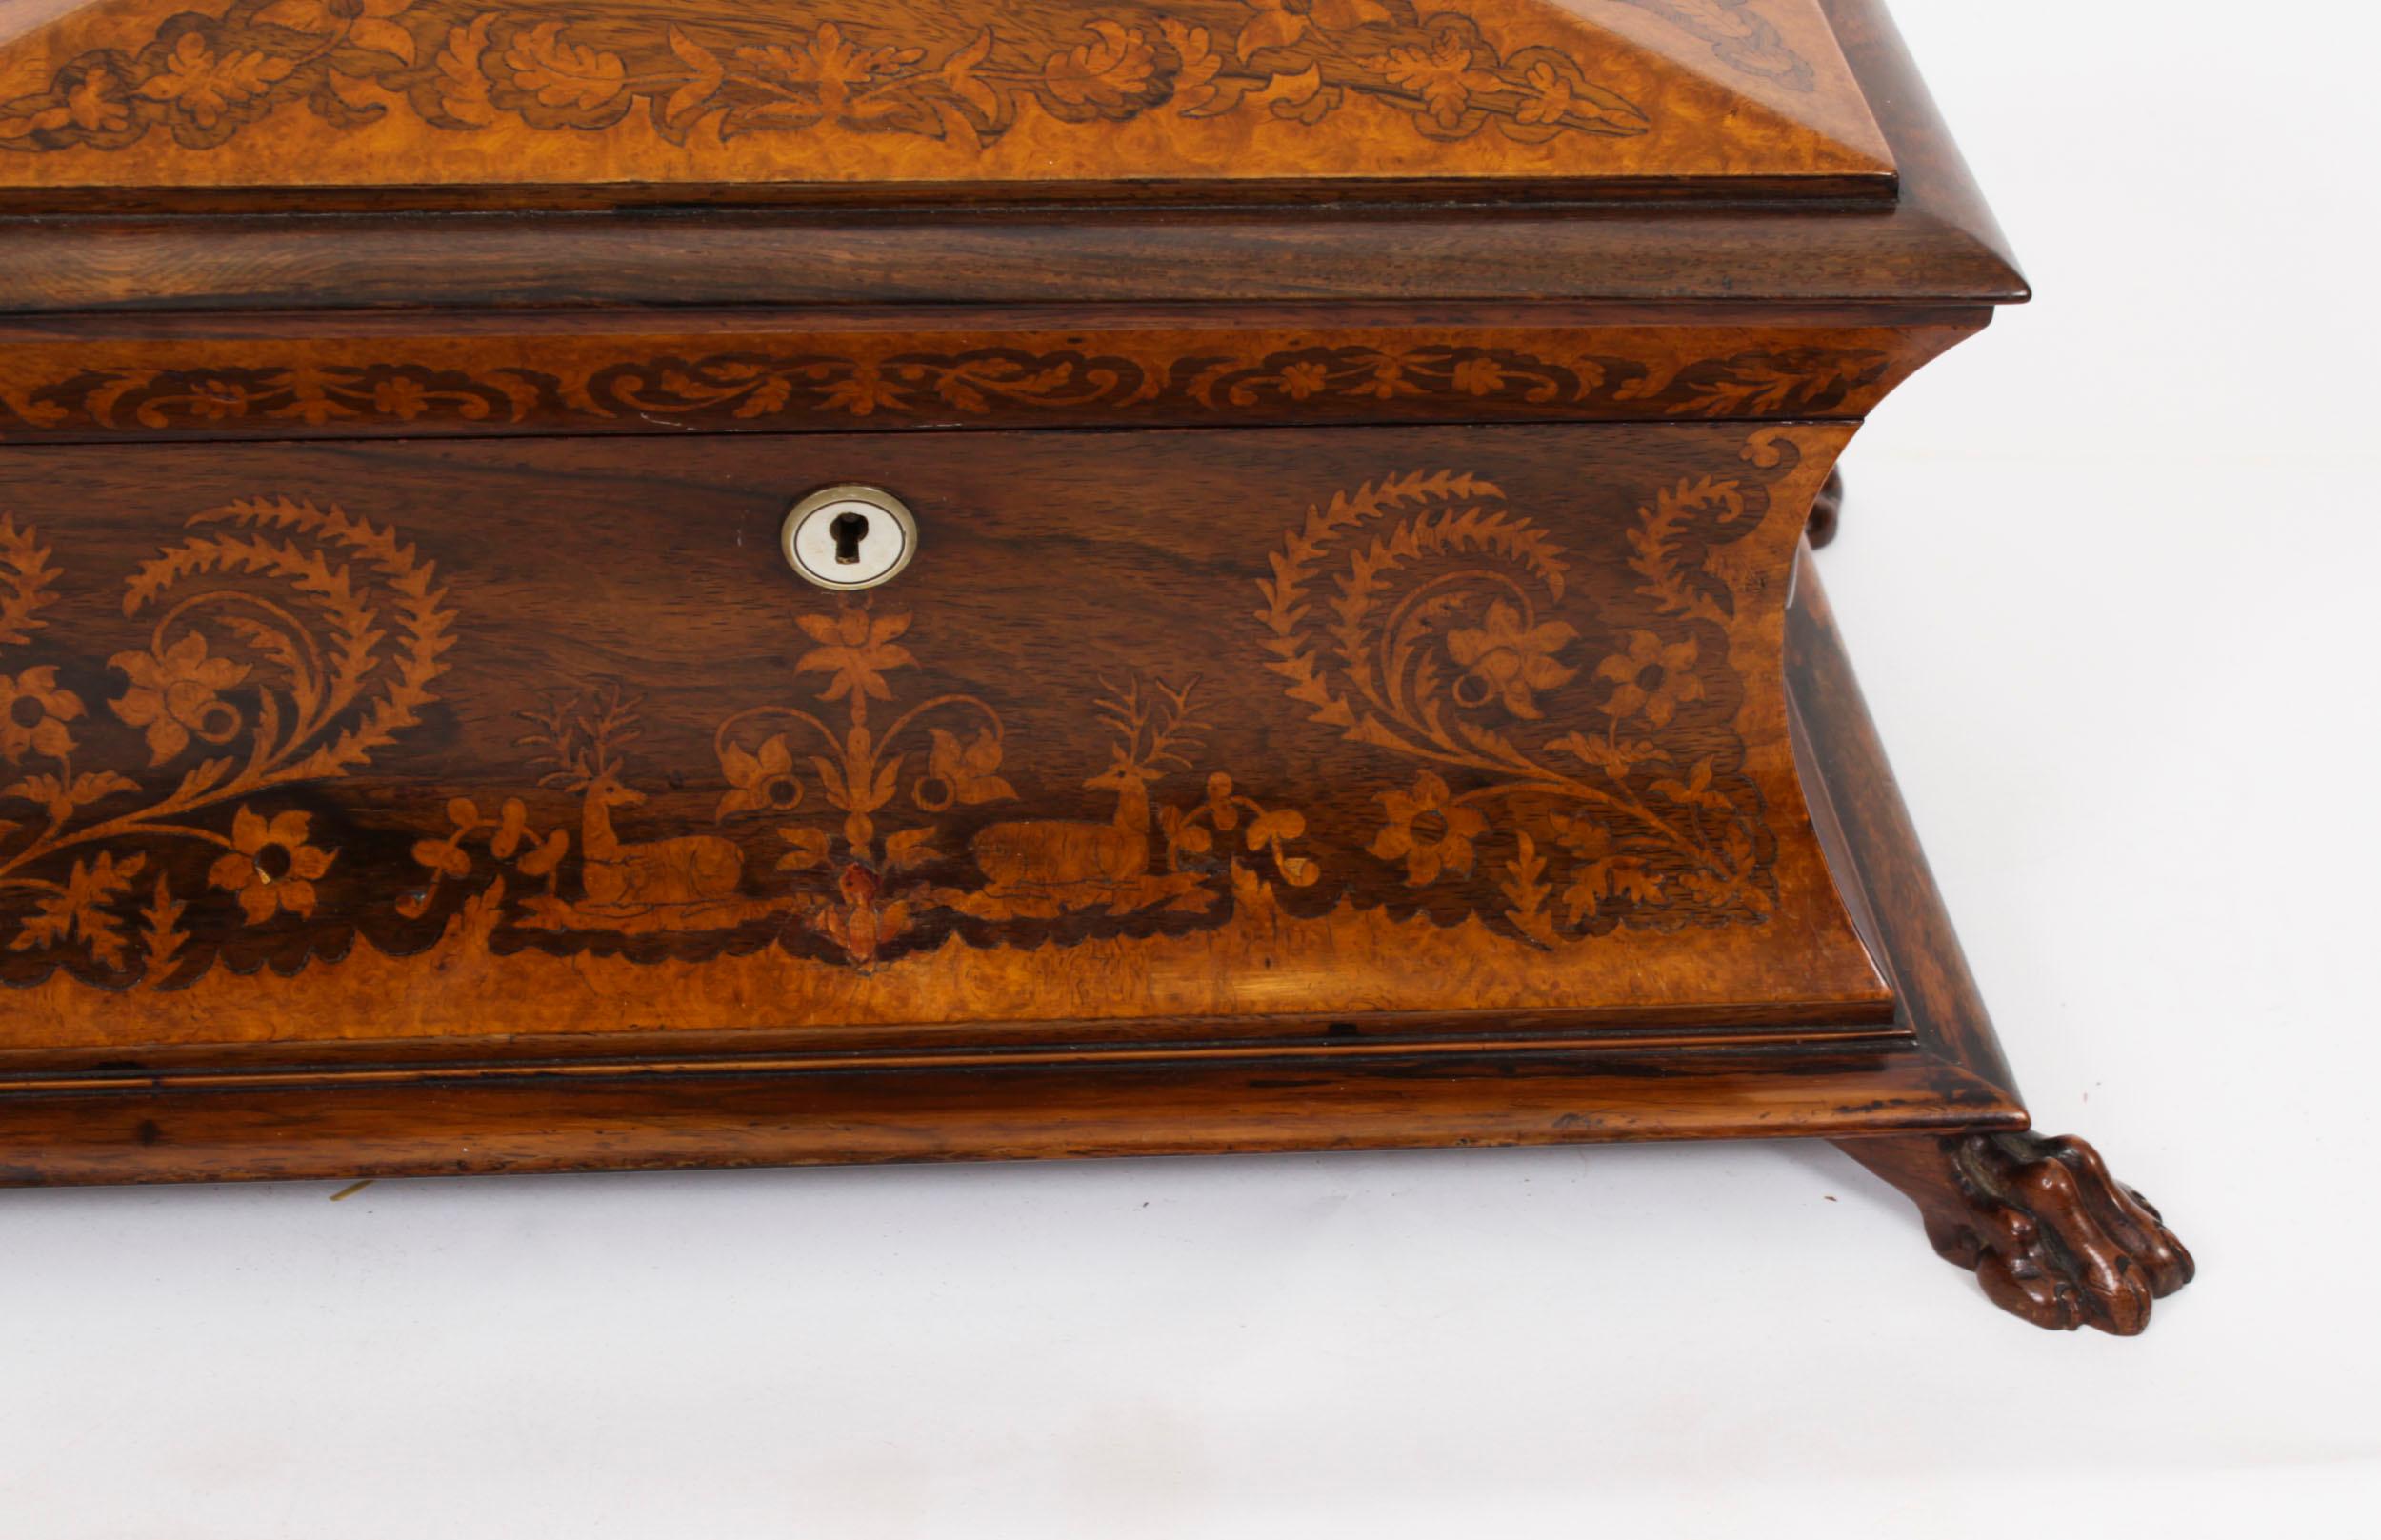 Antique George IV Gonçalo Alves & Amboyna Marquetry Tea Caddy C1825 19th Century For Sale 2